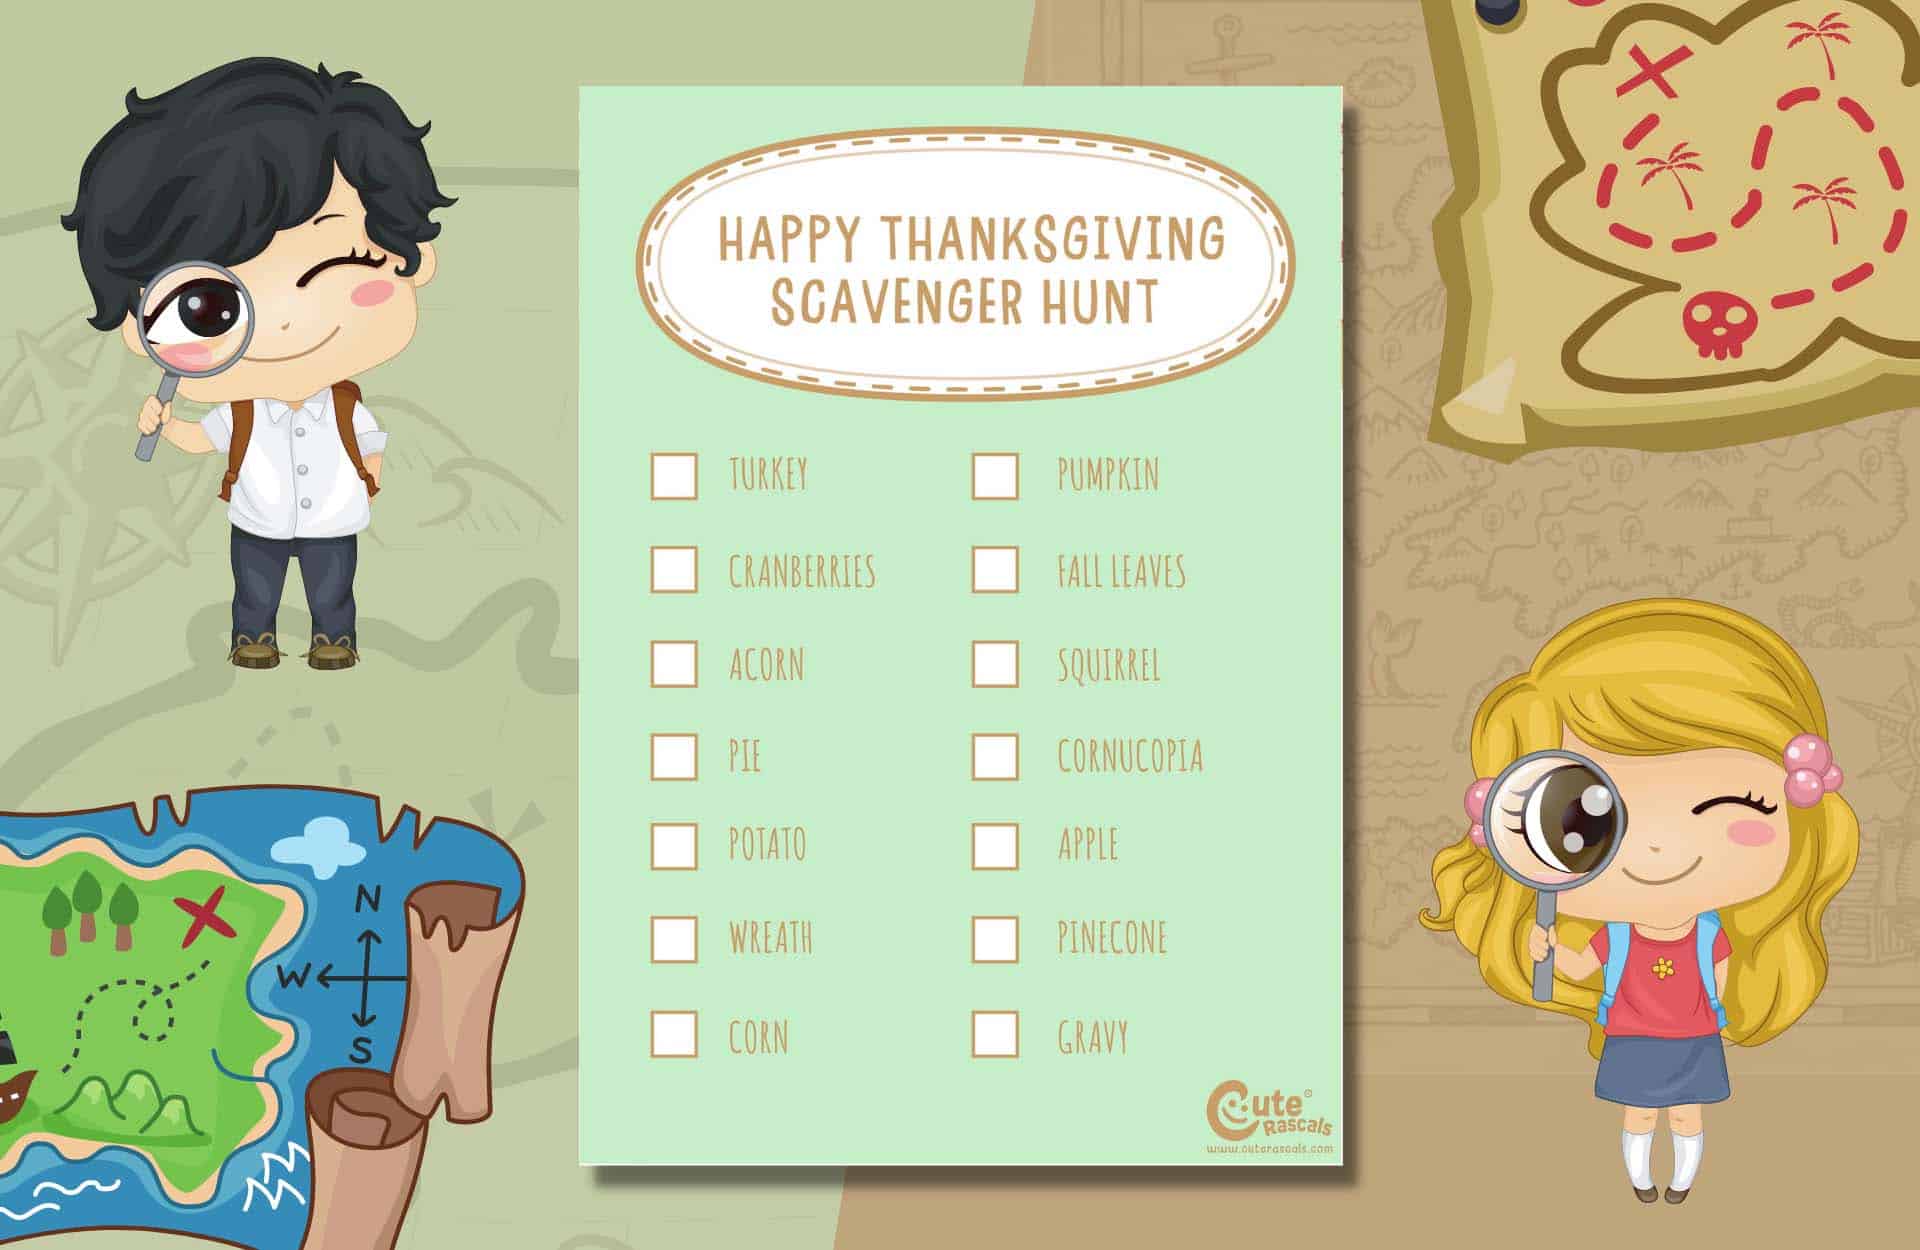 Creative Indoor/Outdoor Thanksgiving Scavenger Hunt For Kids To Keep Them Entertained